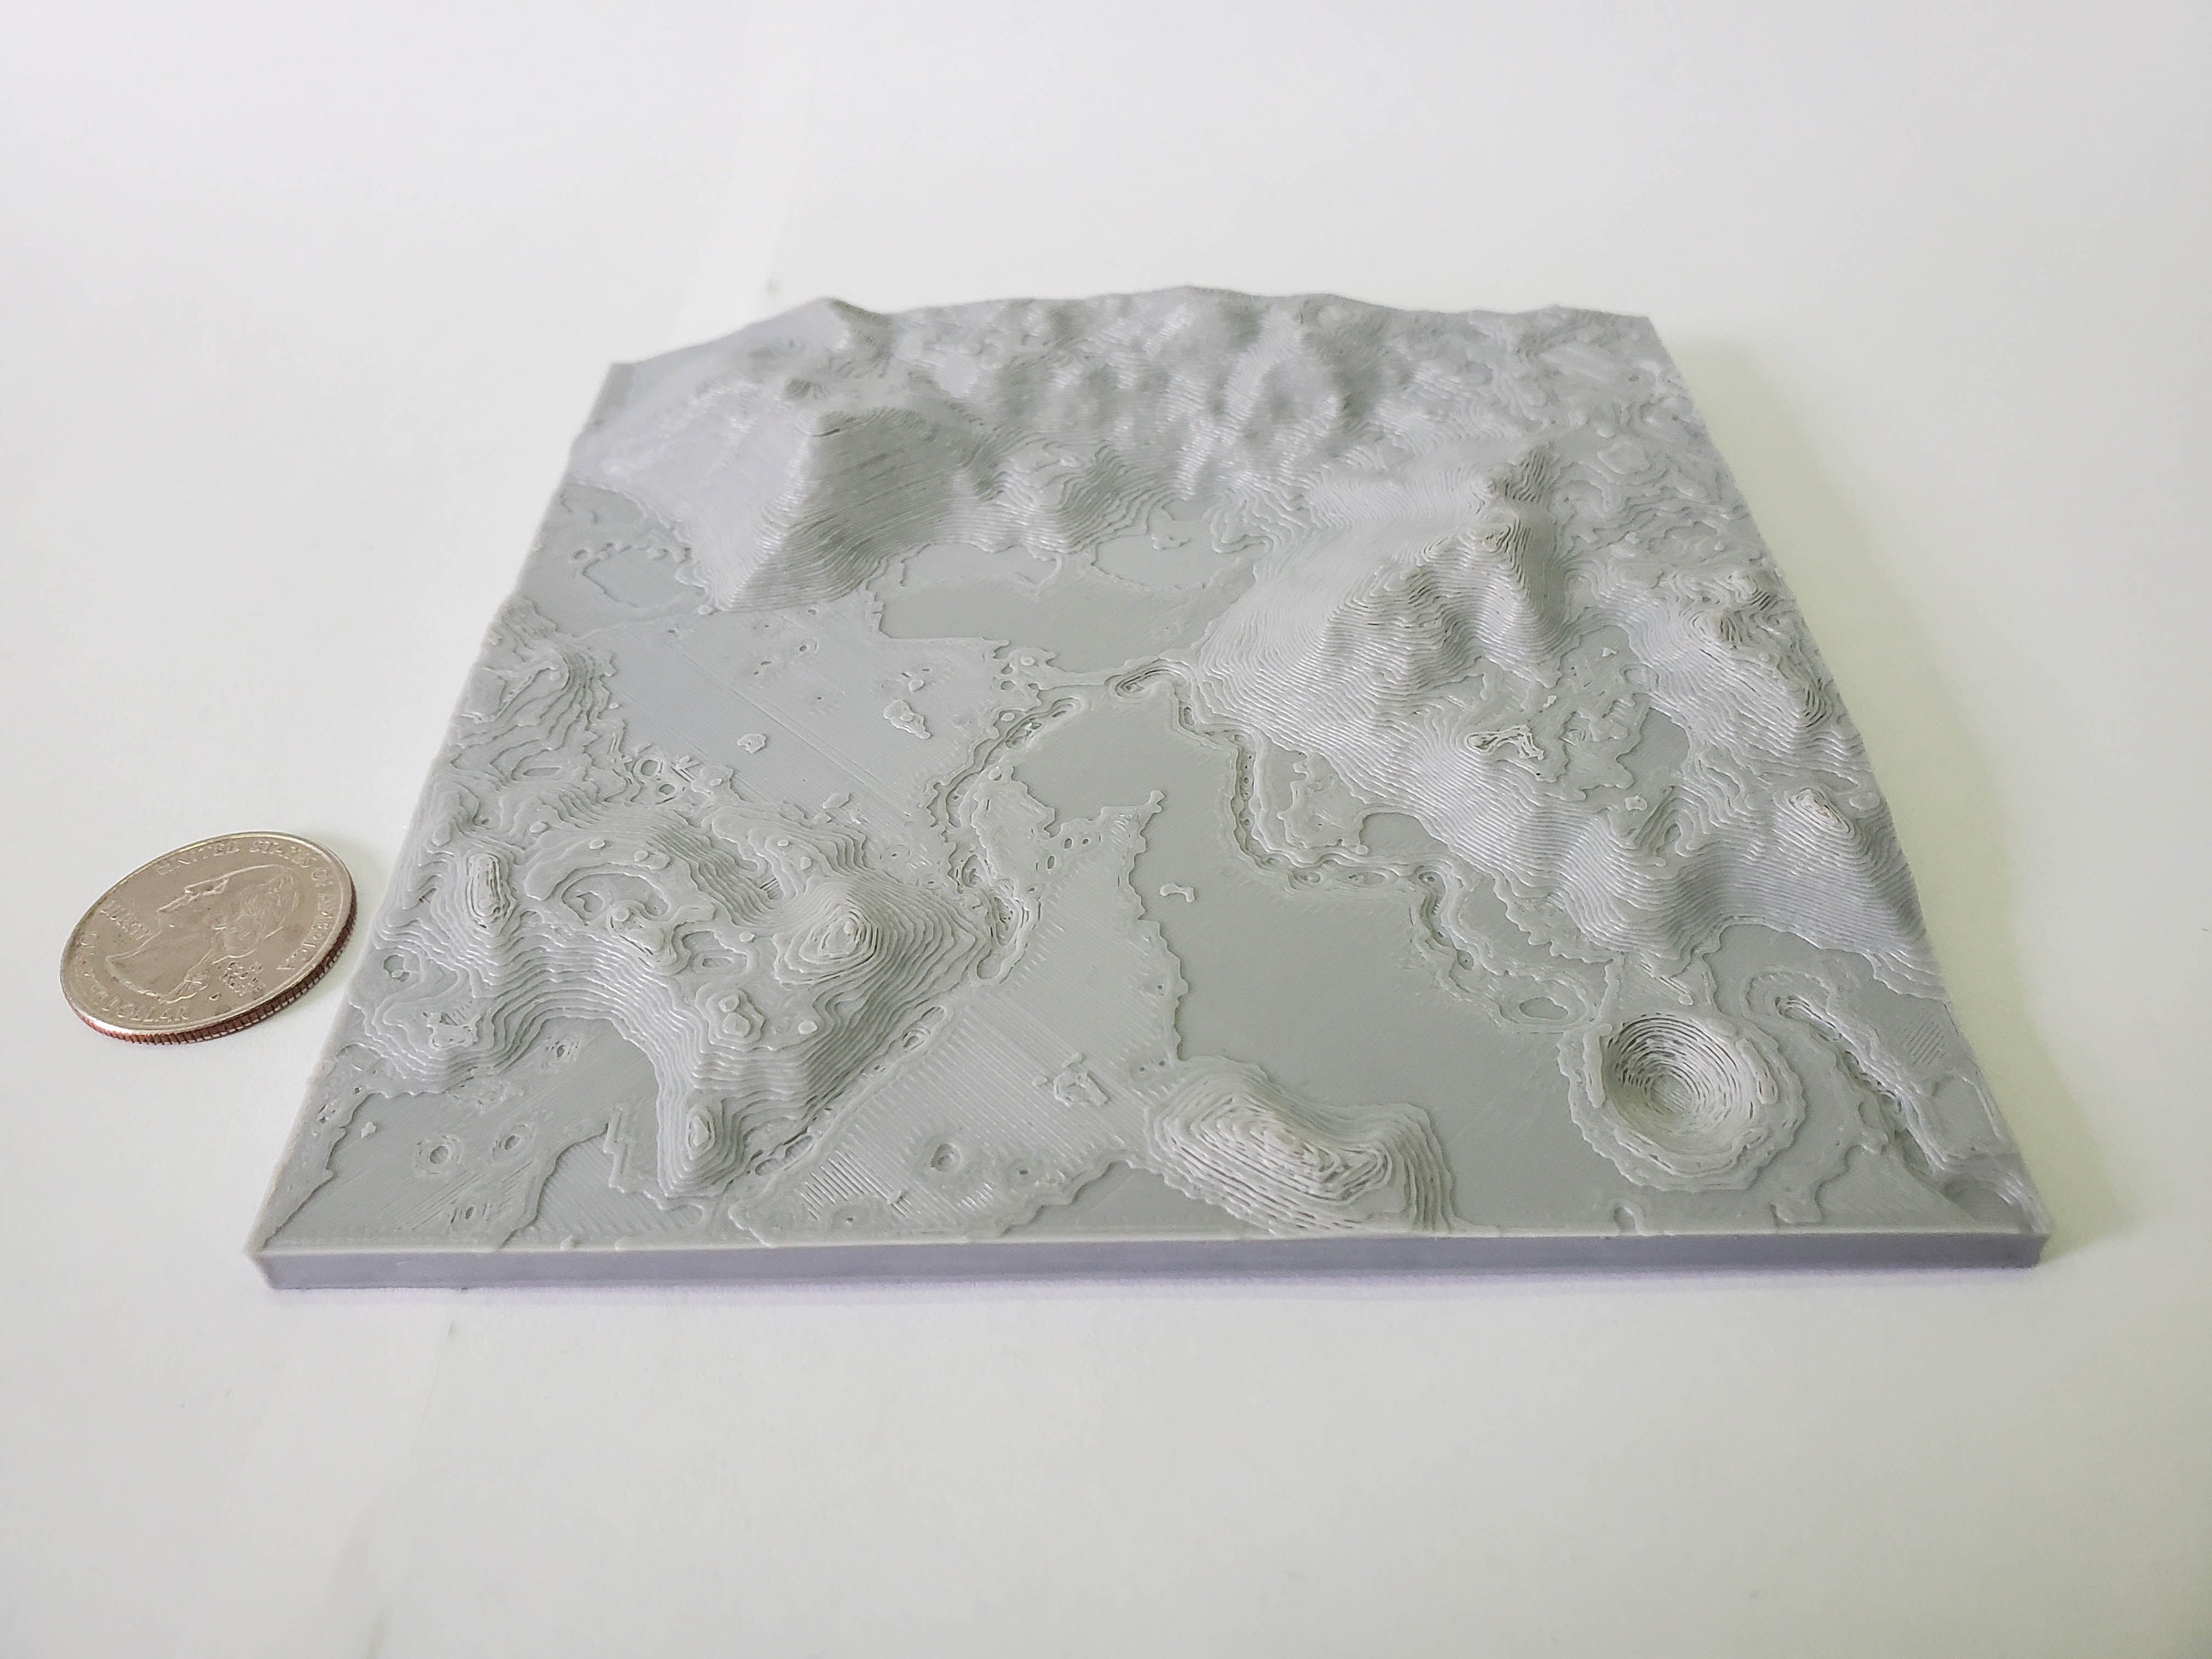 APOLLO 15 Moon Landing Site Accurate 3D Topographical Map of - Etsy